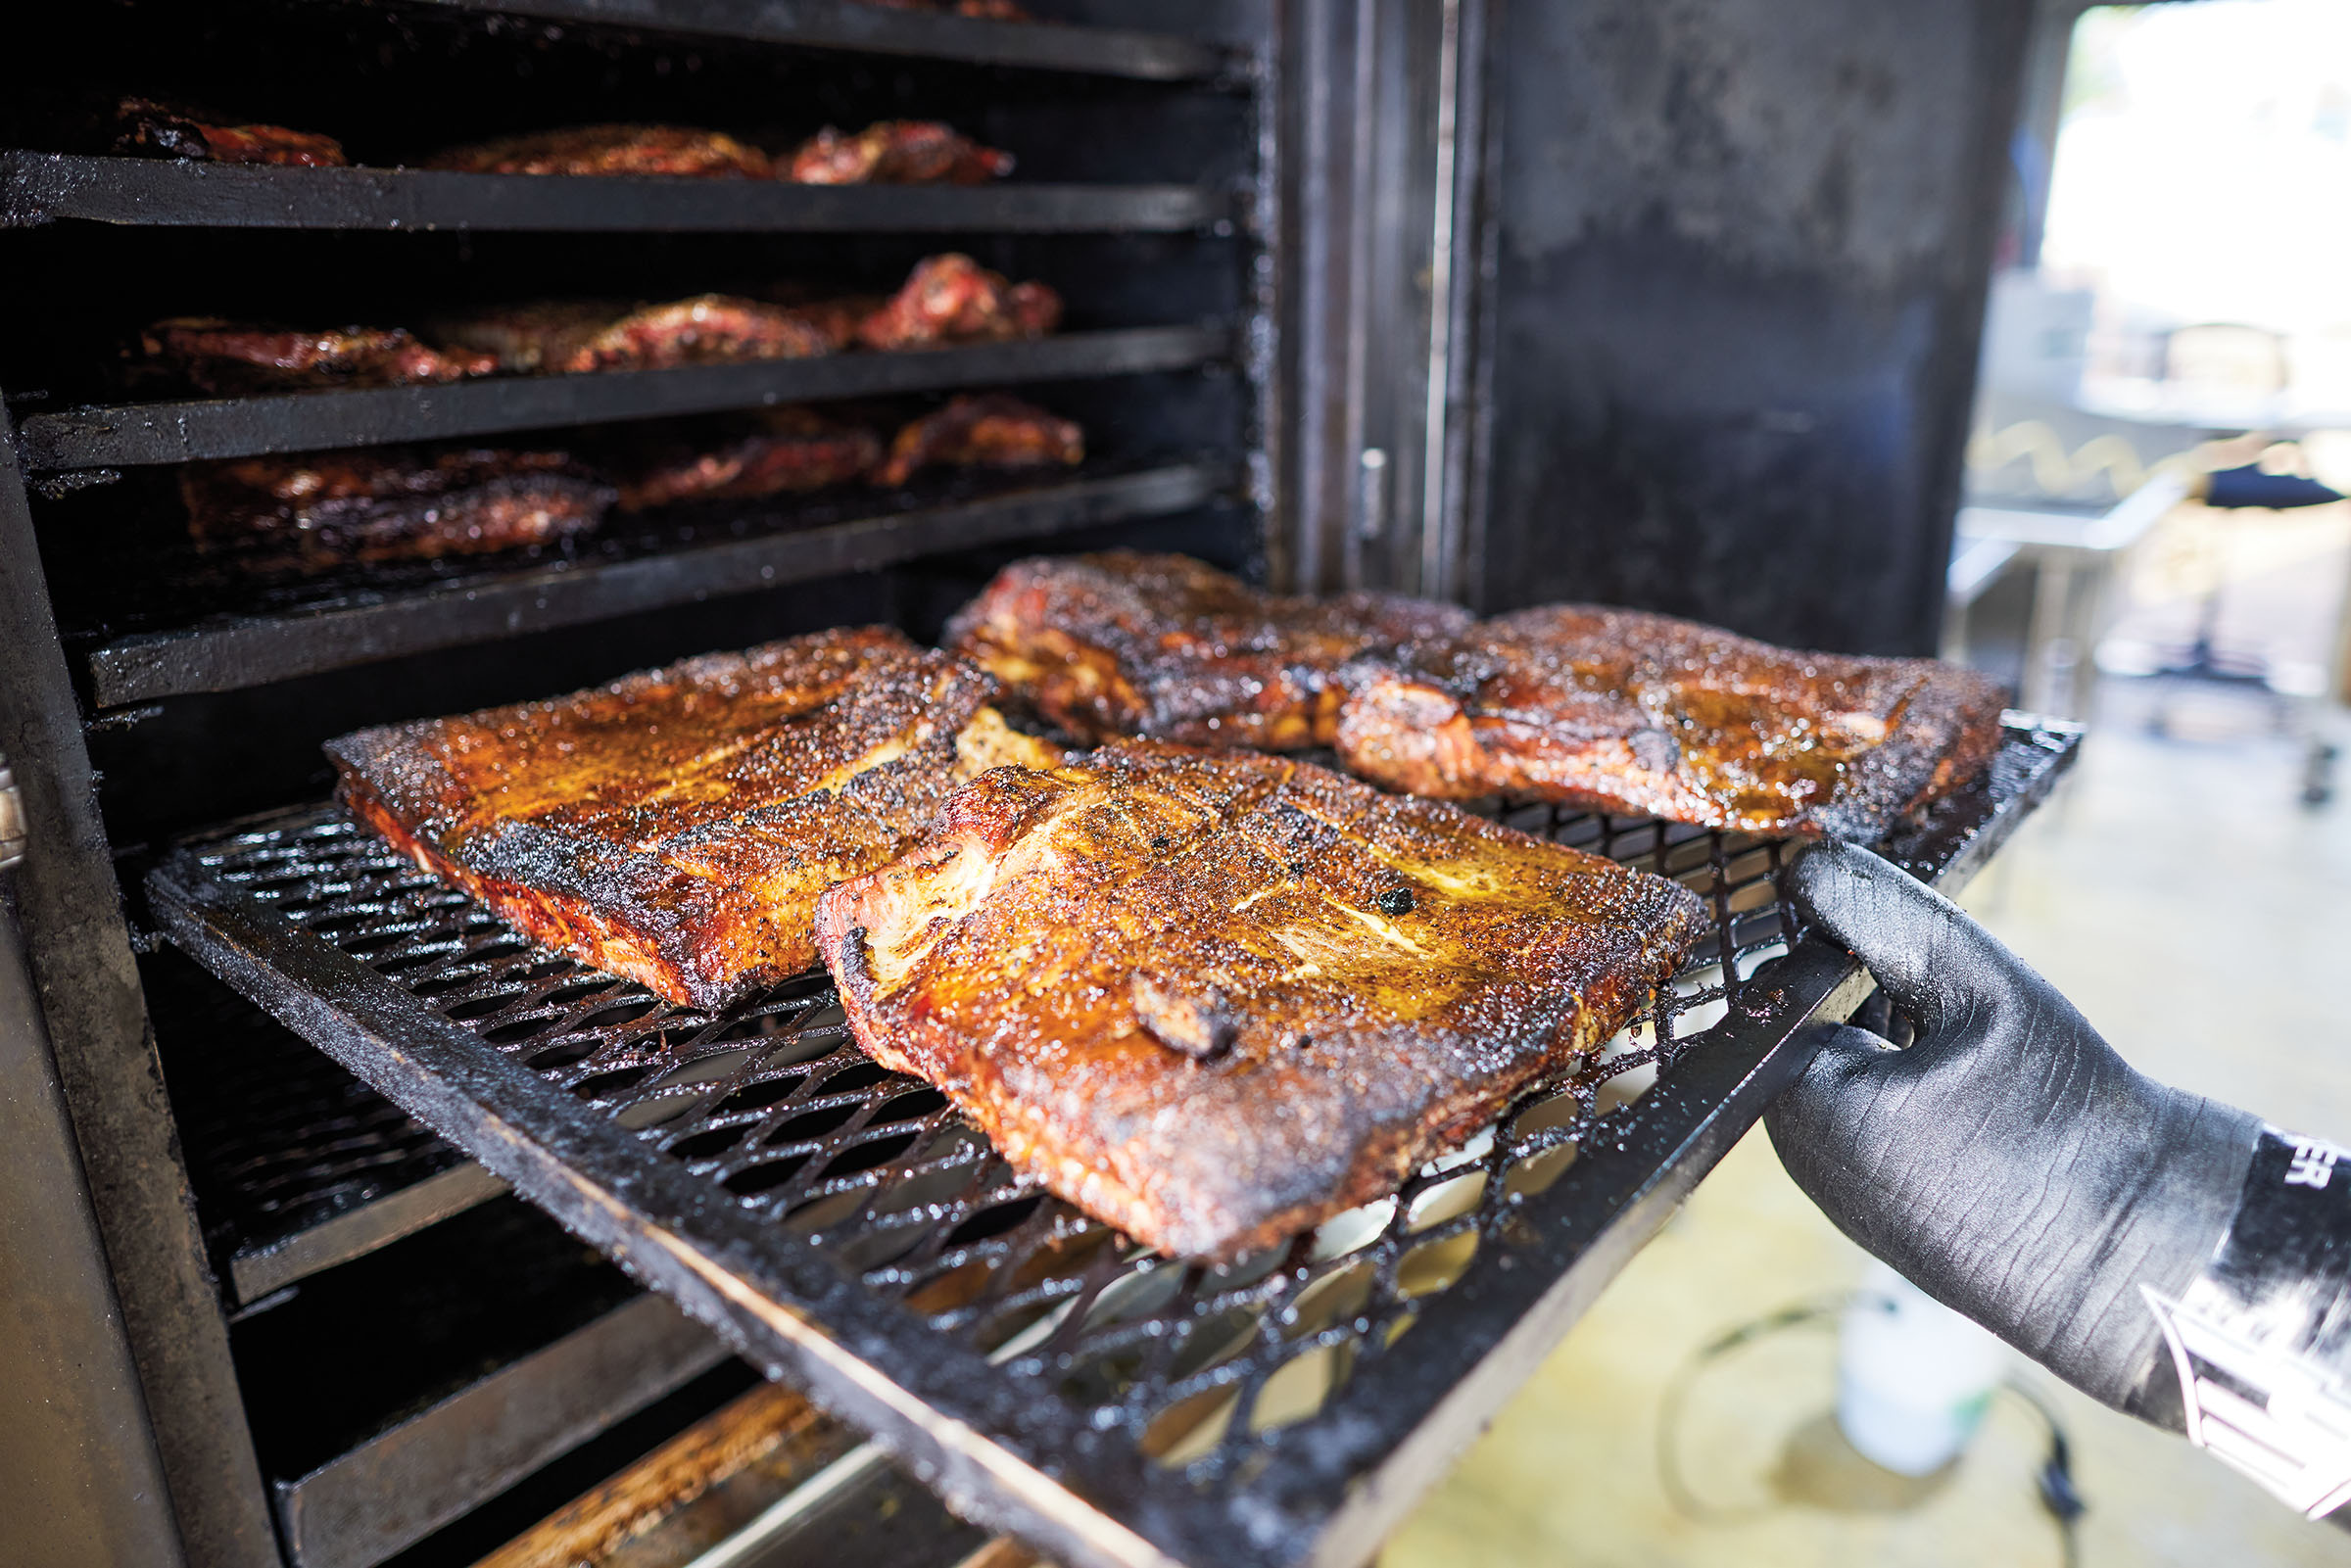 Four slabs of meat are loaded onto a metal tray and placed into a smoker